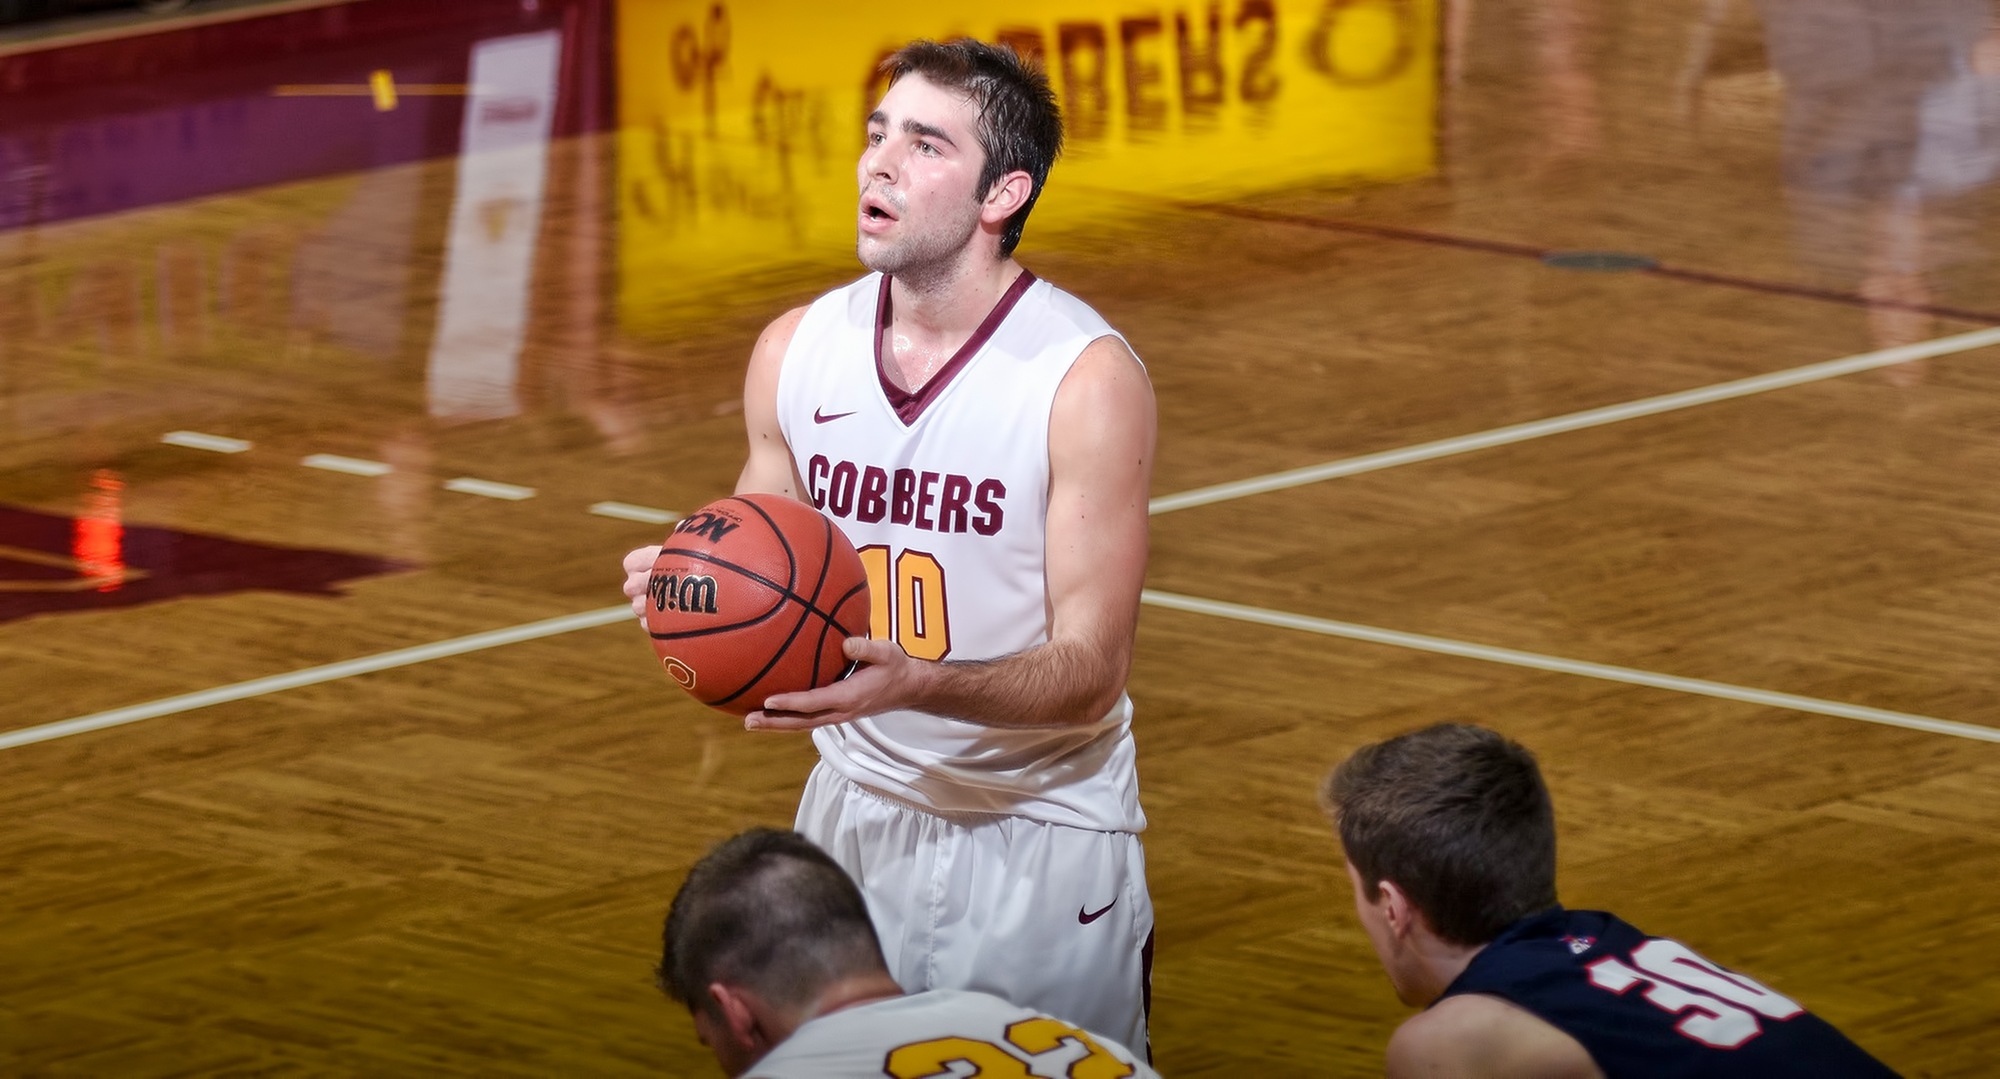 Senior Tommy Schyma gets ready to drain a free throw during the second half of the Cobbers' Senior Celebration Day against St. Mary's. Schyma finished with 25 points and 10 rebounds in his first game back since Dec. 14.